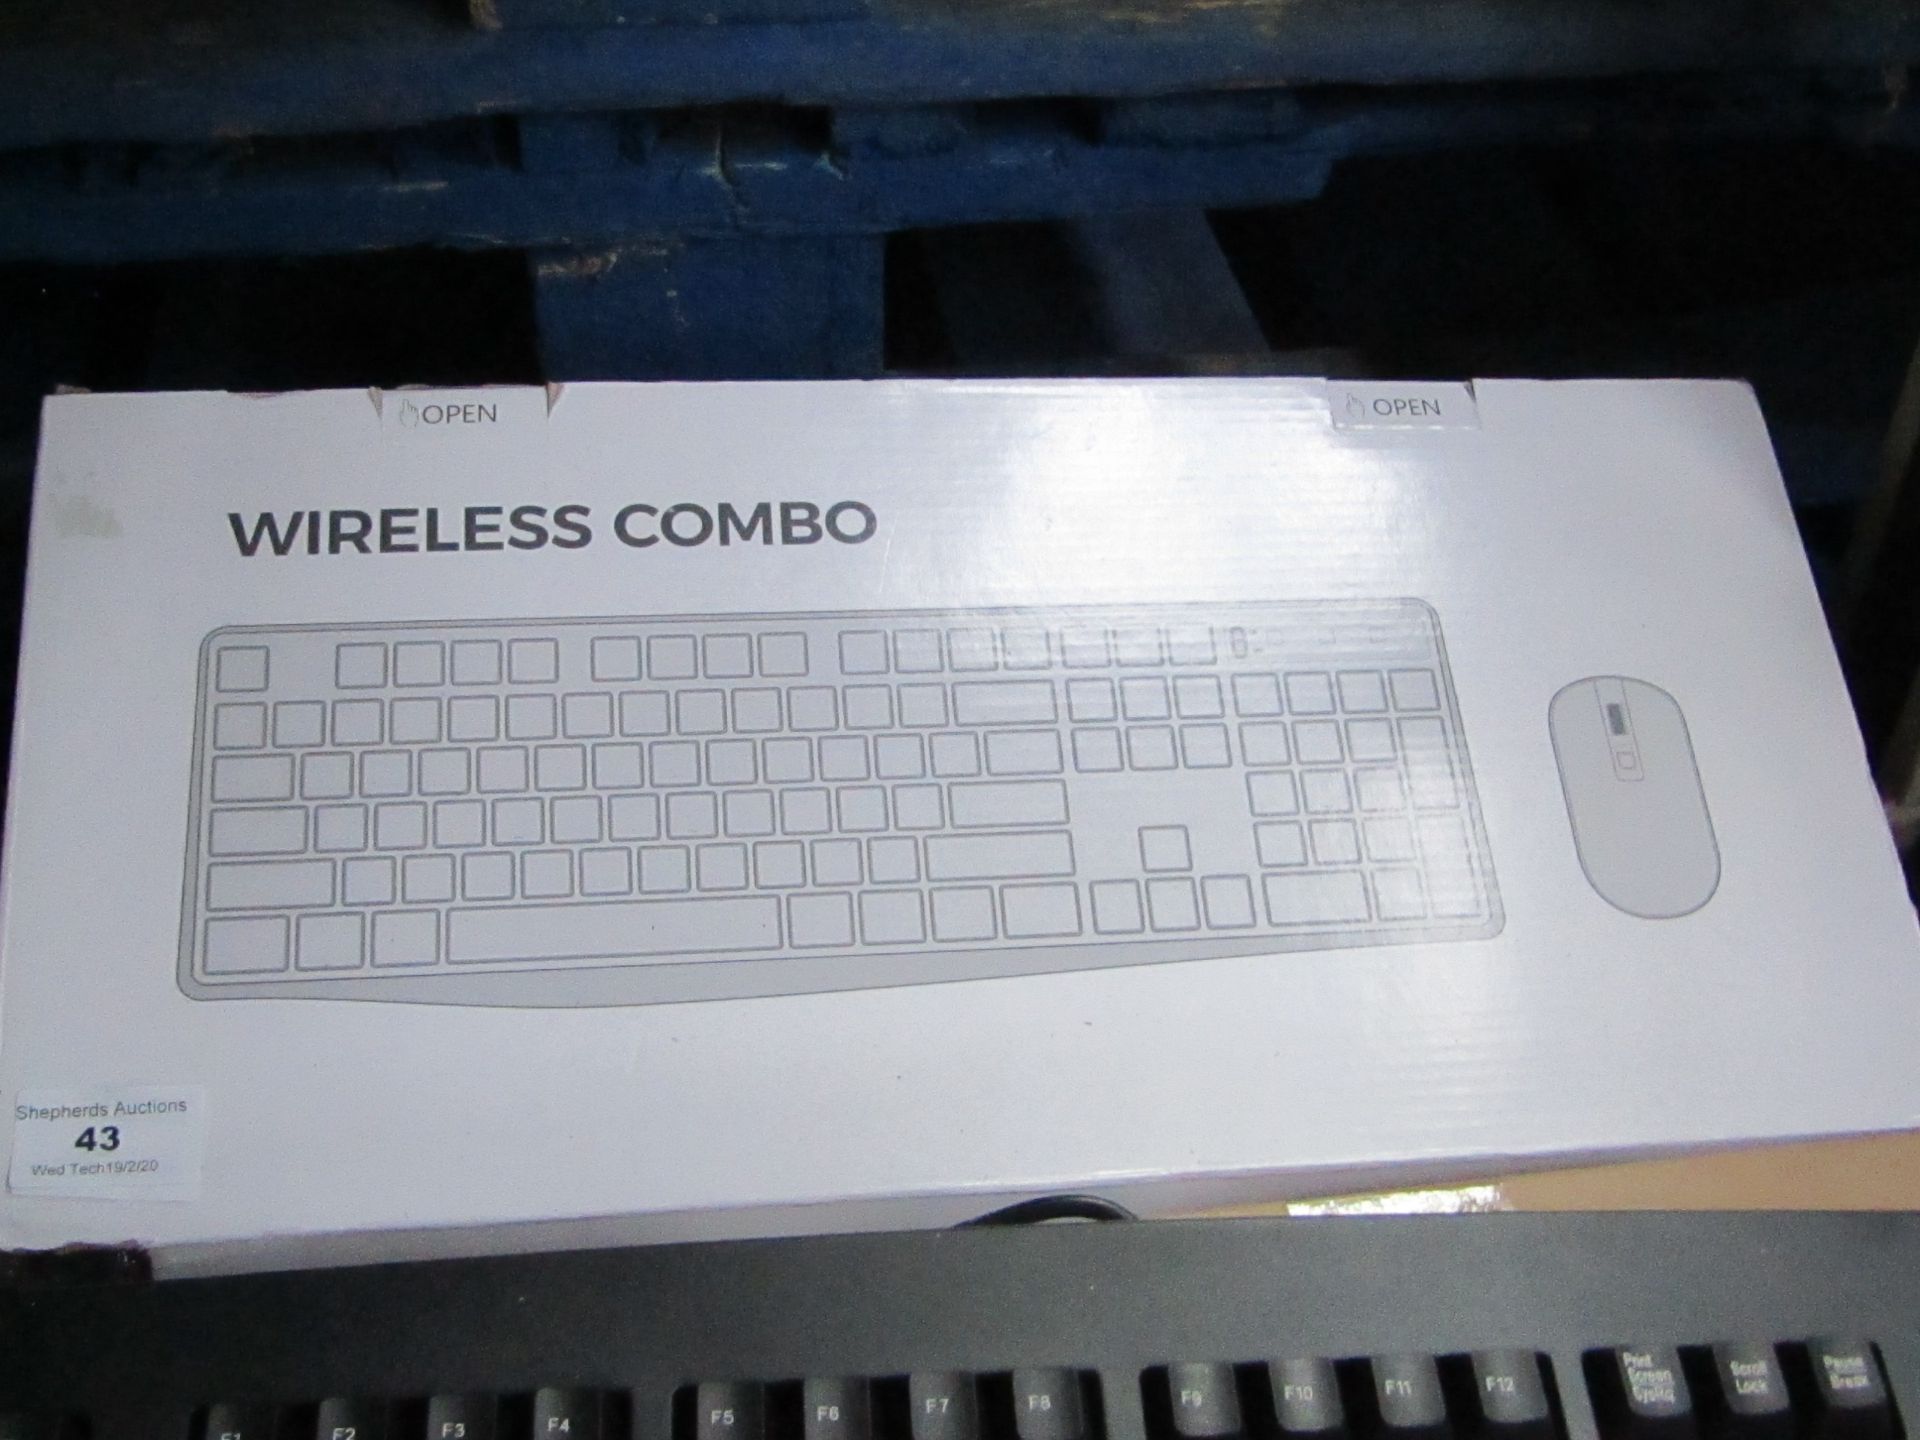 Wireless combo mouse and keyboard, untested and boxed.